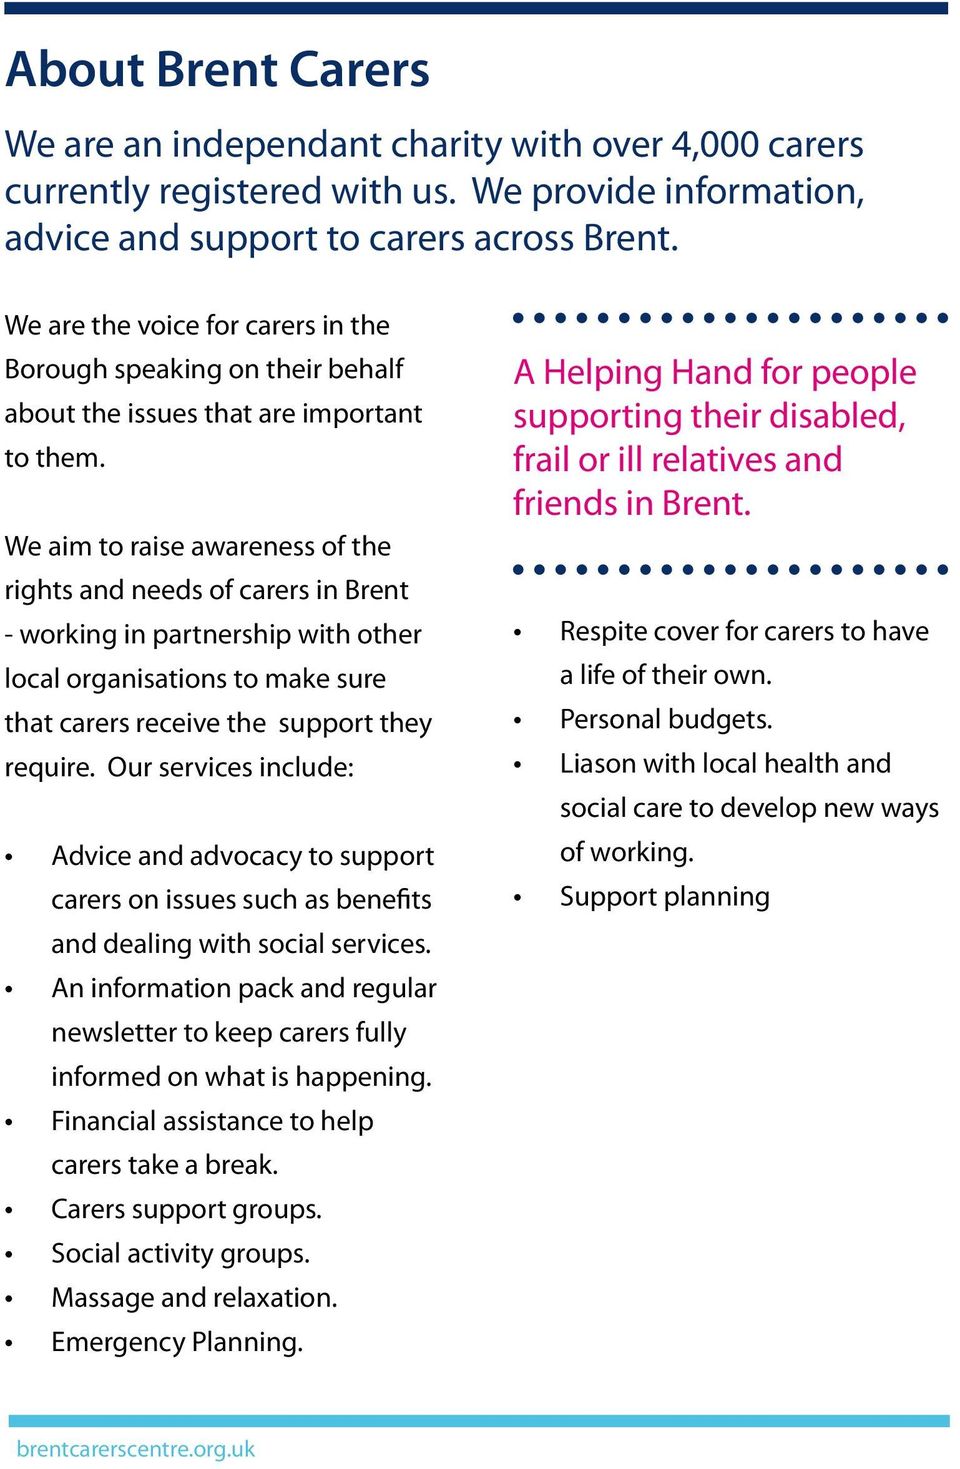 We aim to raise awareness of the rights and needs of carers in Brent - working in partnership with other local organisations to make sure that carers receive the support they require.